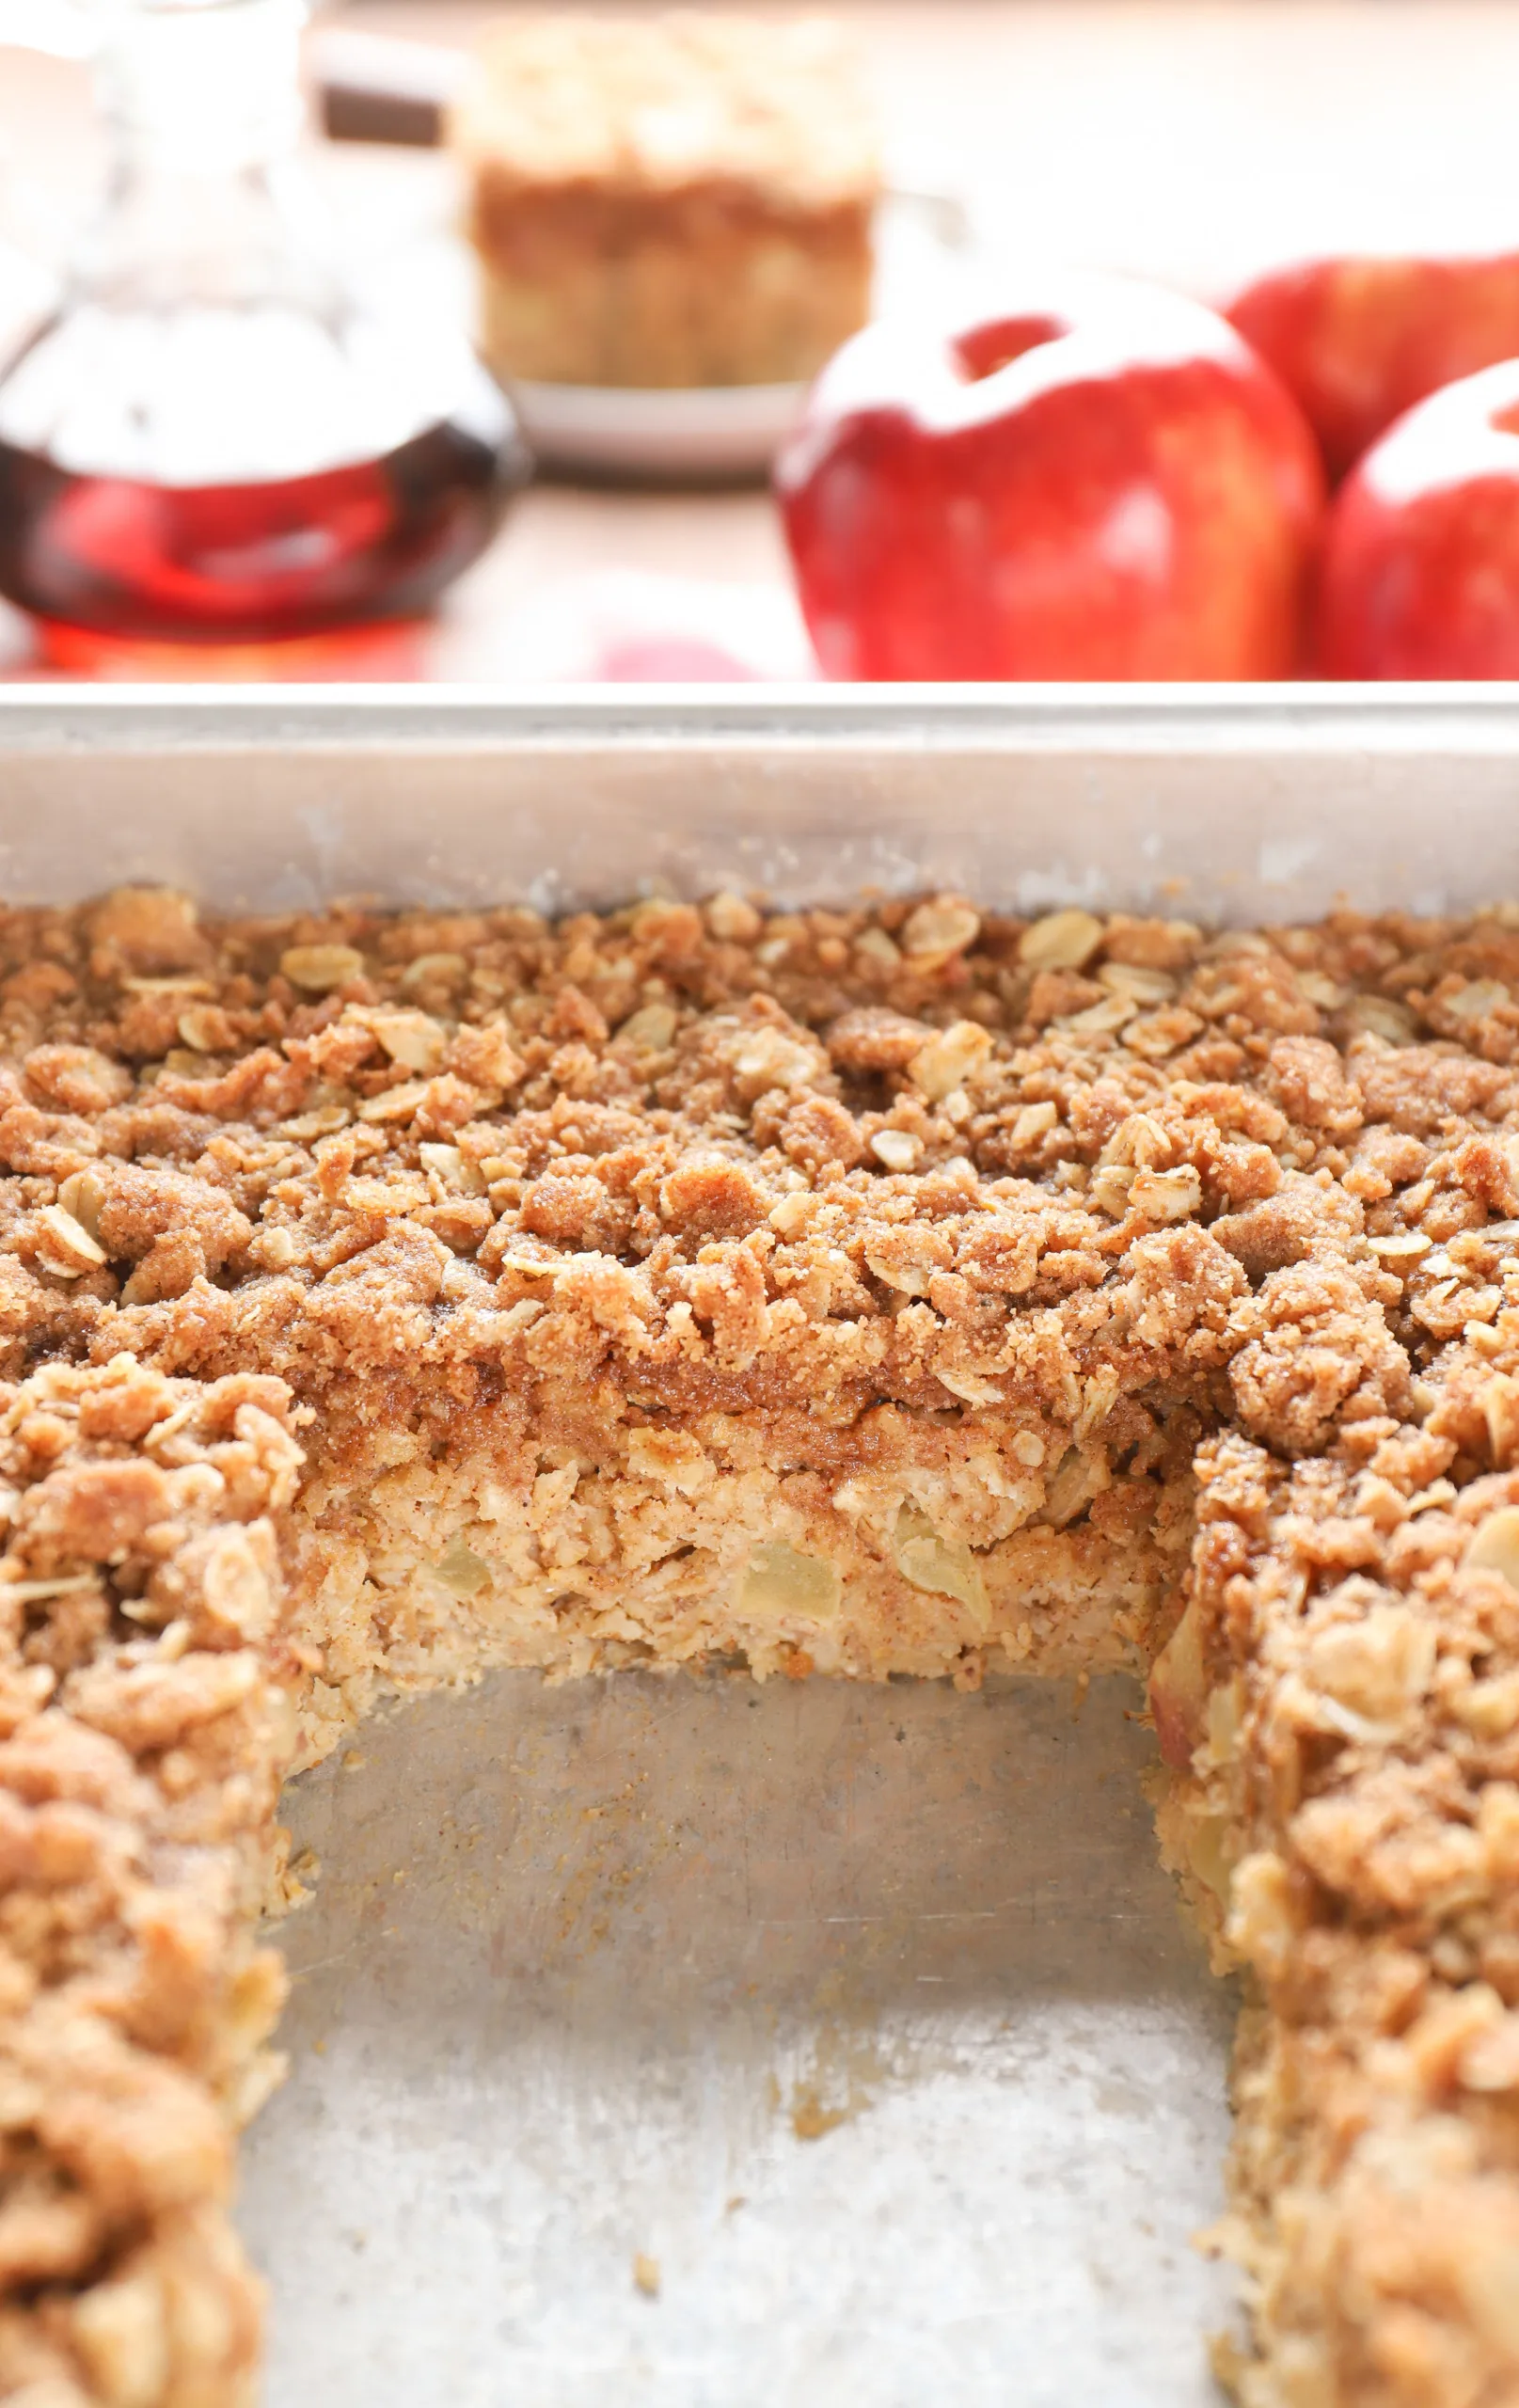 Up close view of the pan of baked oatmeal with a piece missing showing the apples in the filling and the streusel topping.